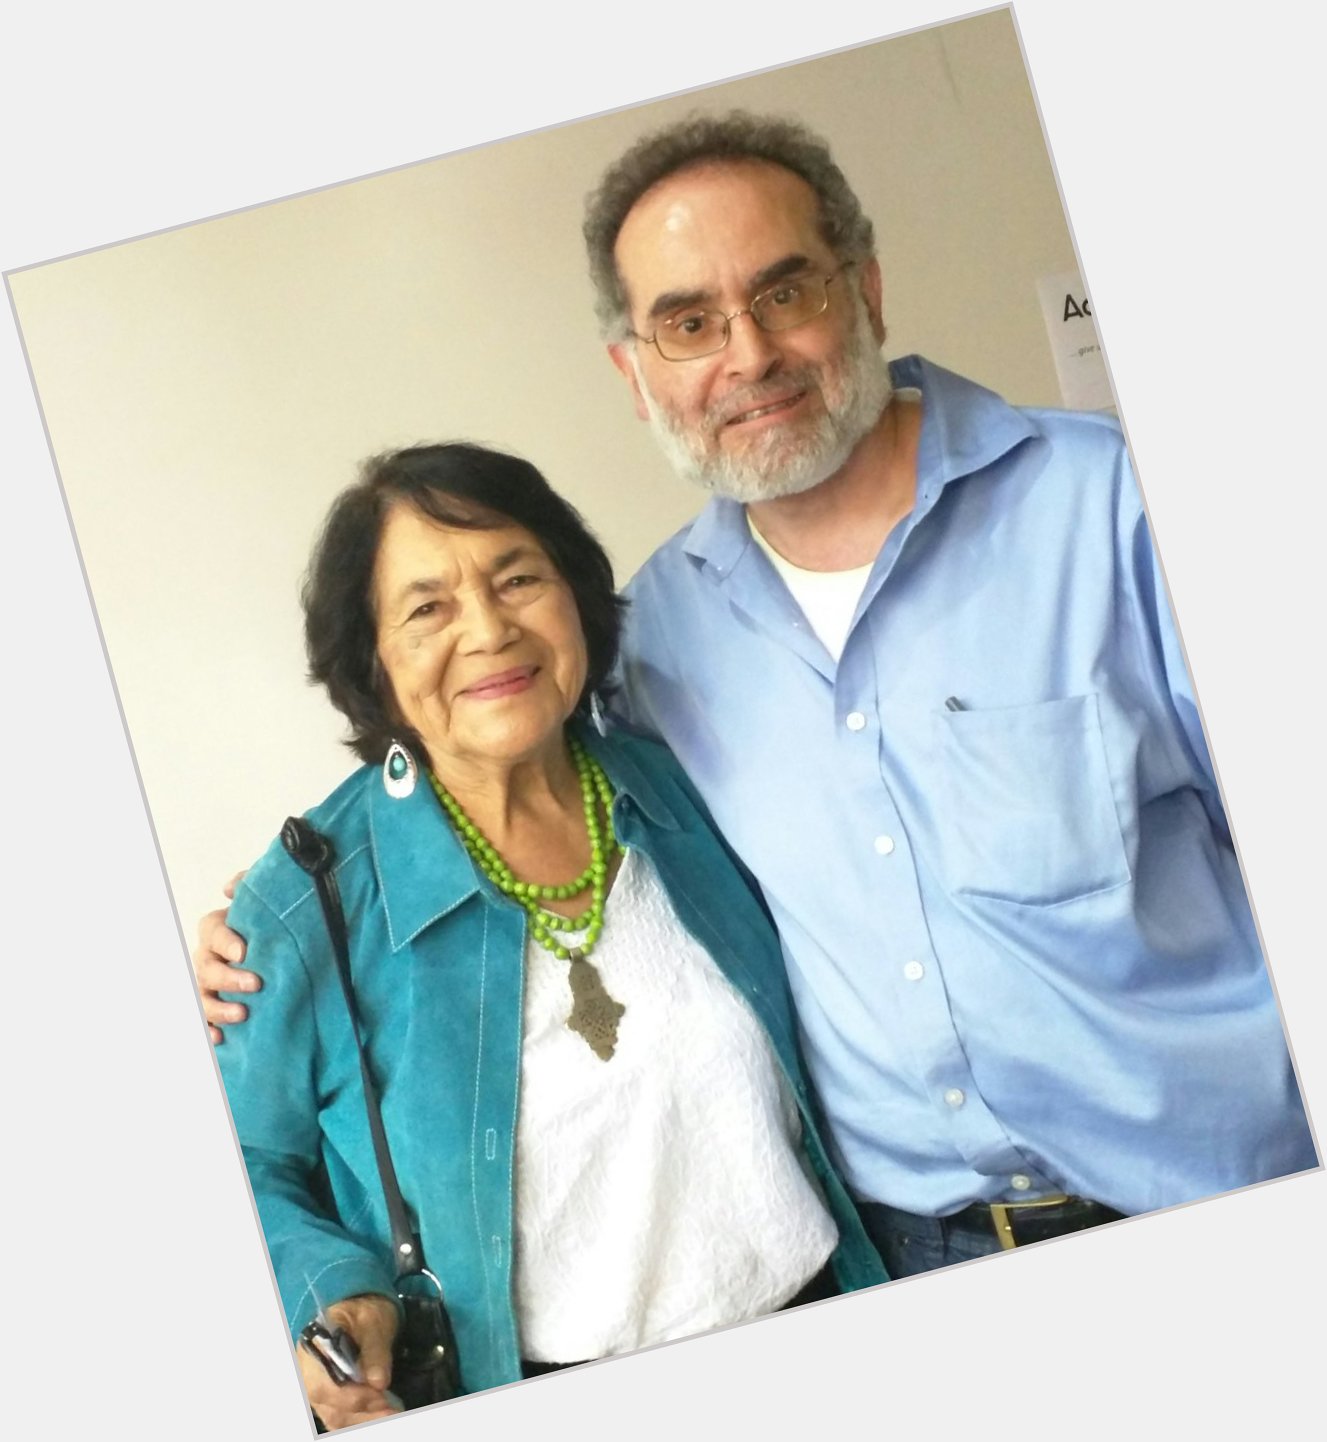 Happy Birthday to my shero and special friend Dolores Huerta.  